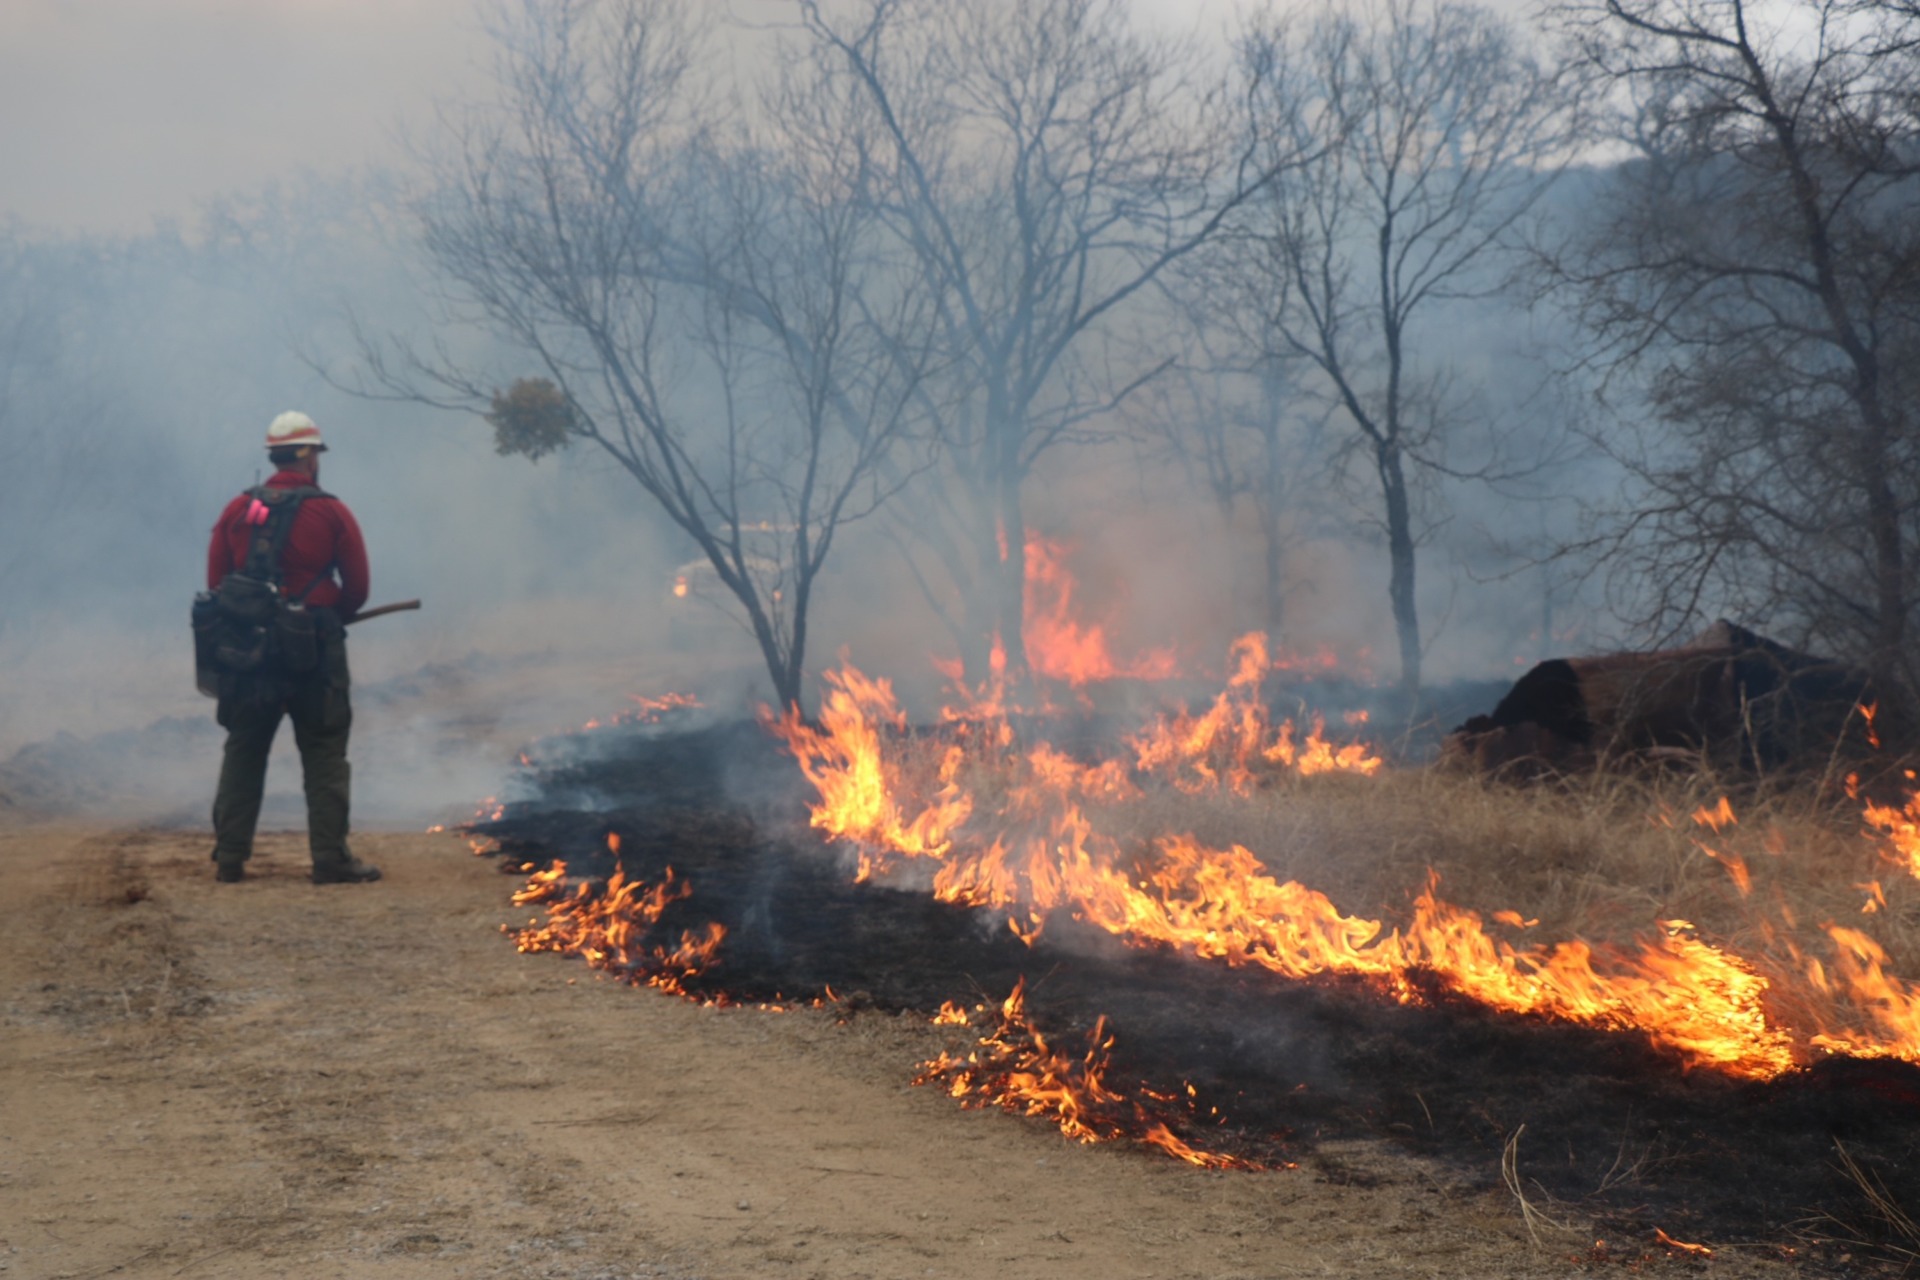 Wildfire activity forecast to increase around I-35 and into South Texas